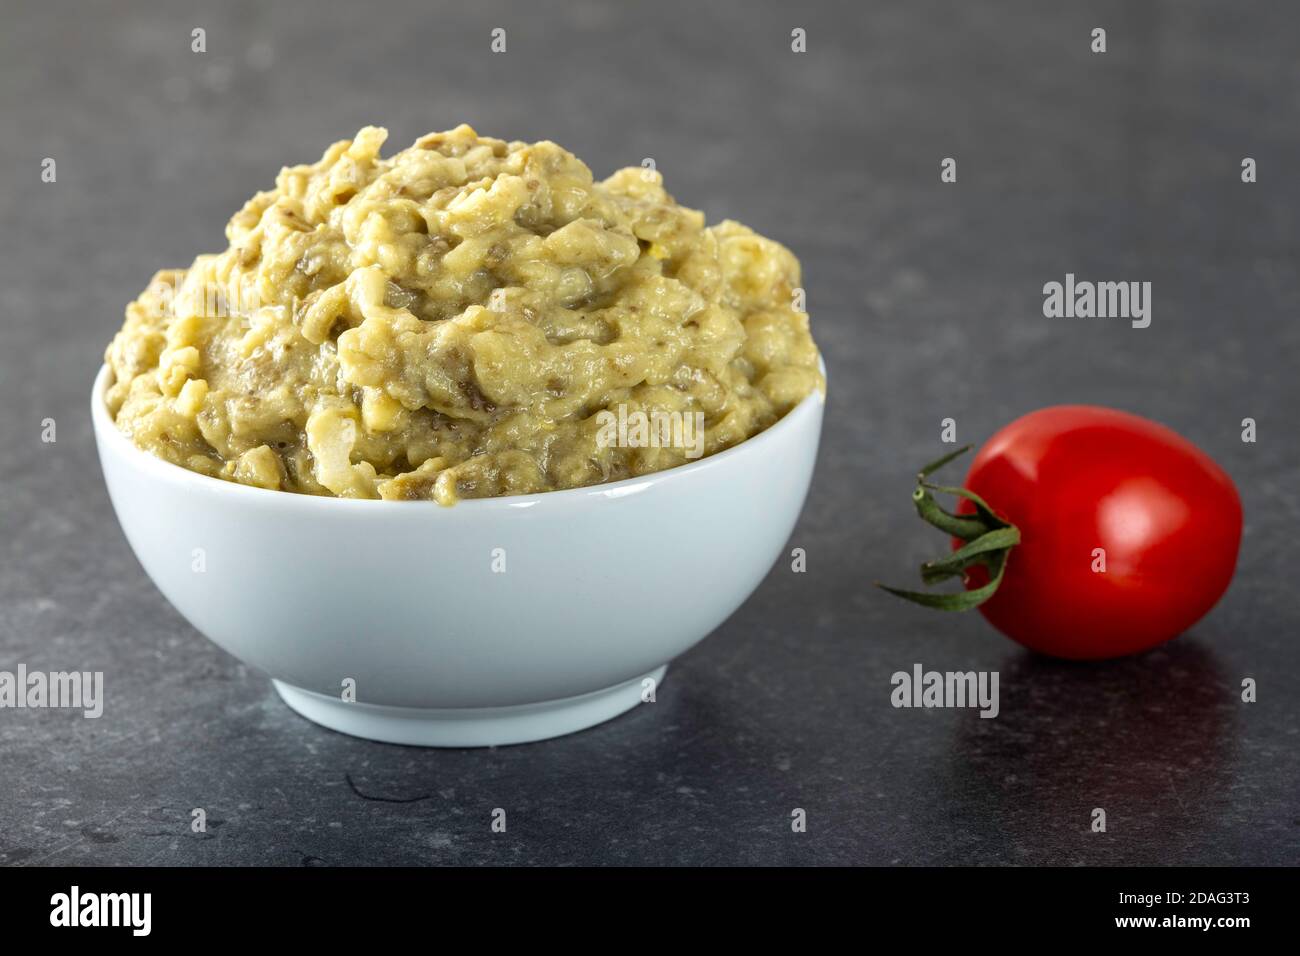 Eggplant salad with onion and mayonnaise in a white bowl Stock Photo